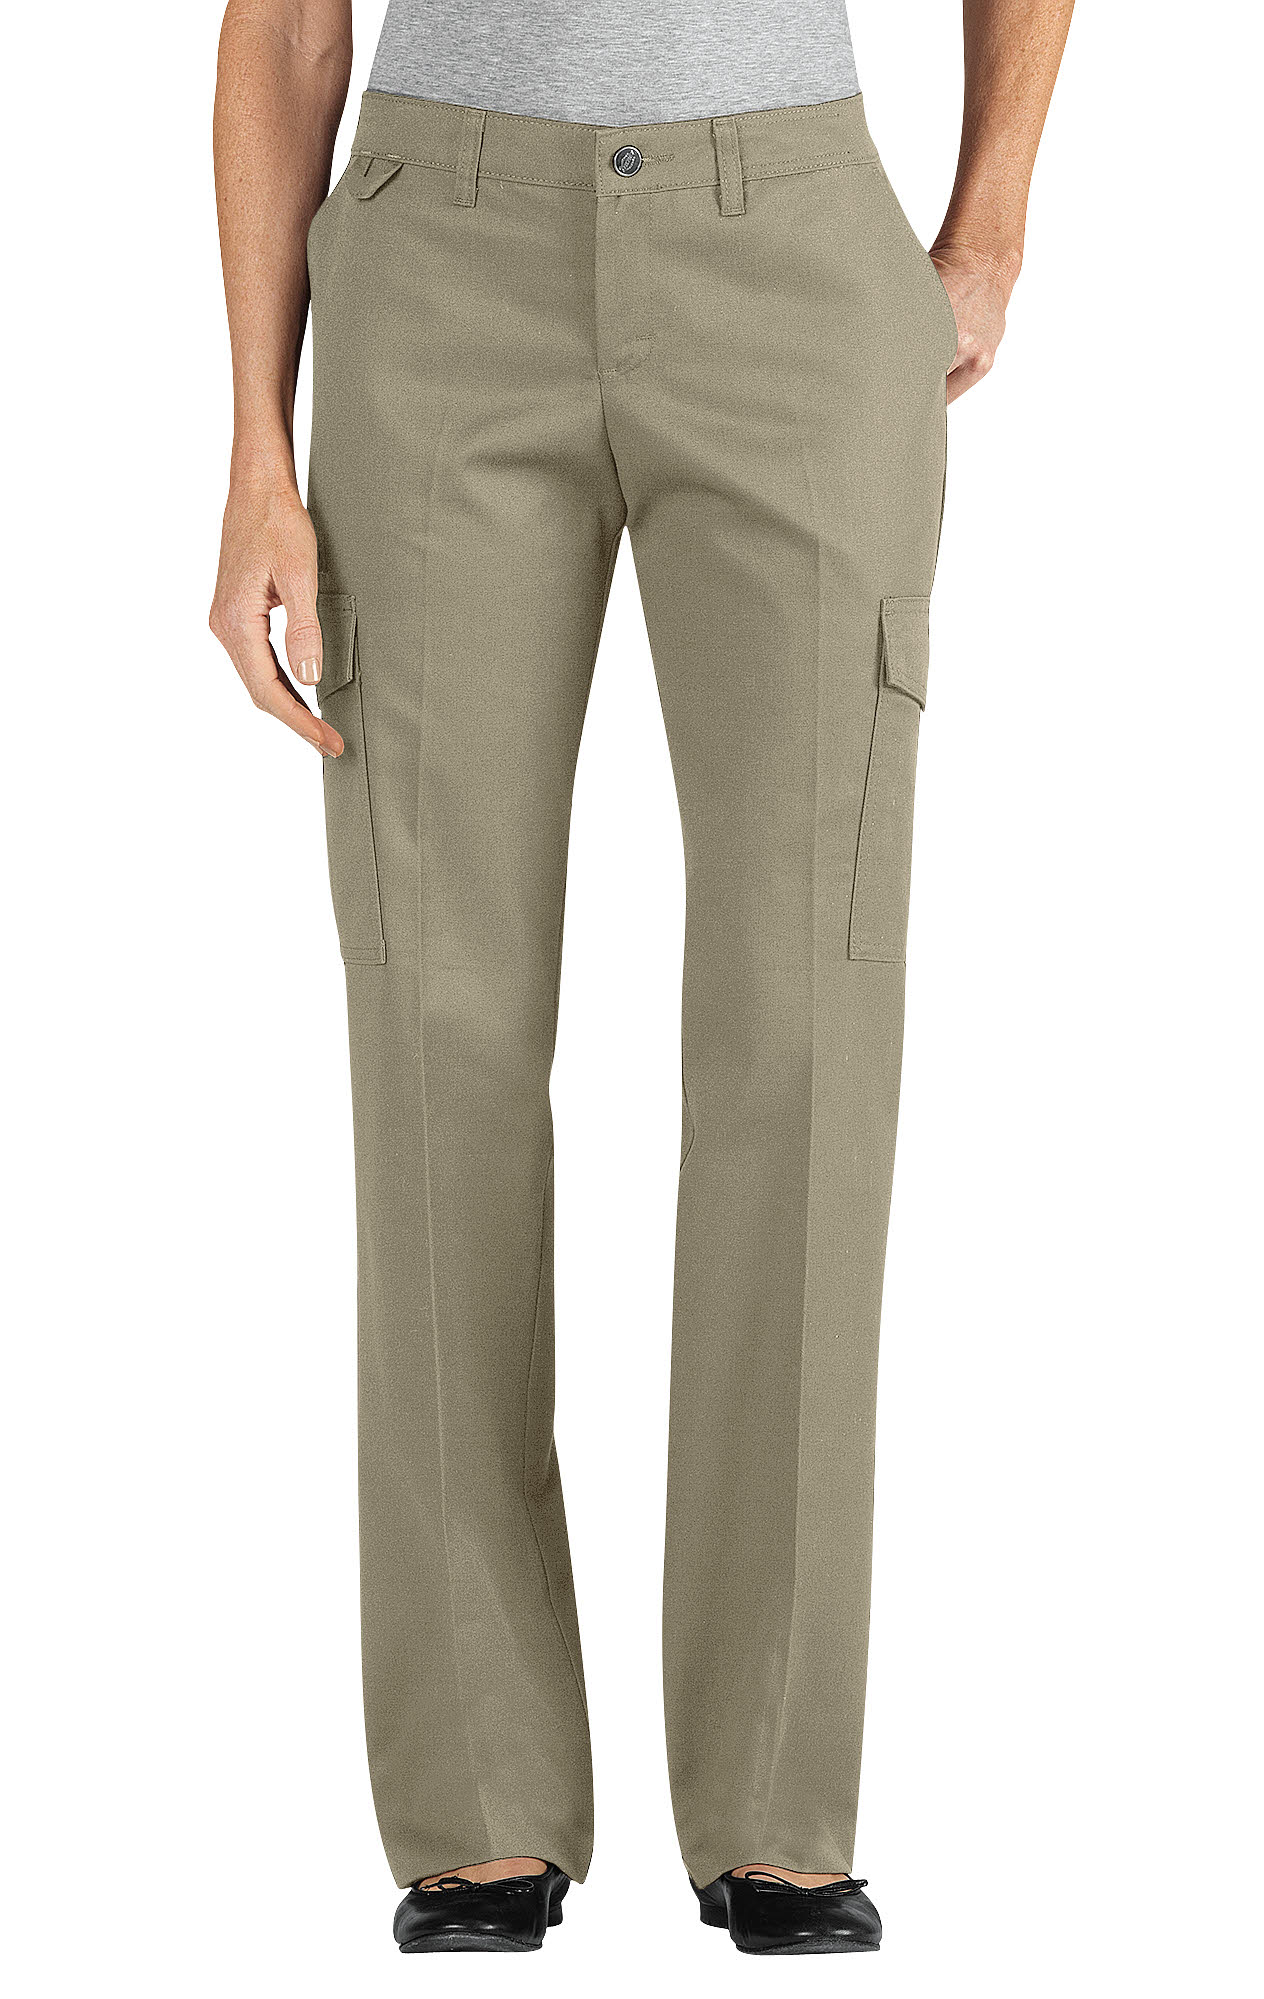 Women's Relaxed Straight Server Cargo Pants - Corporate Cleaners & Laundry